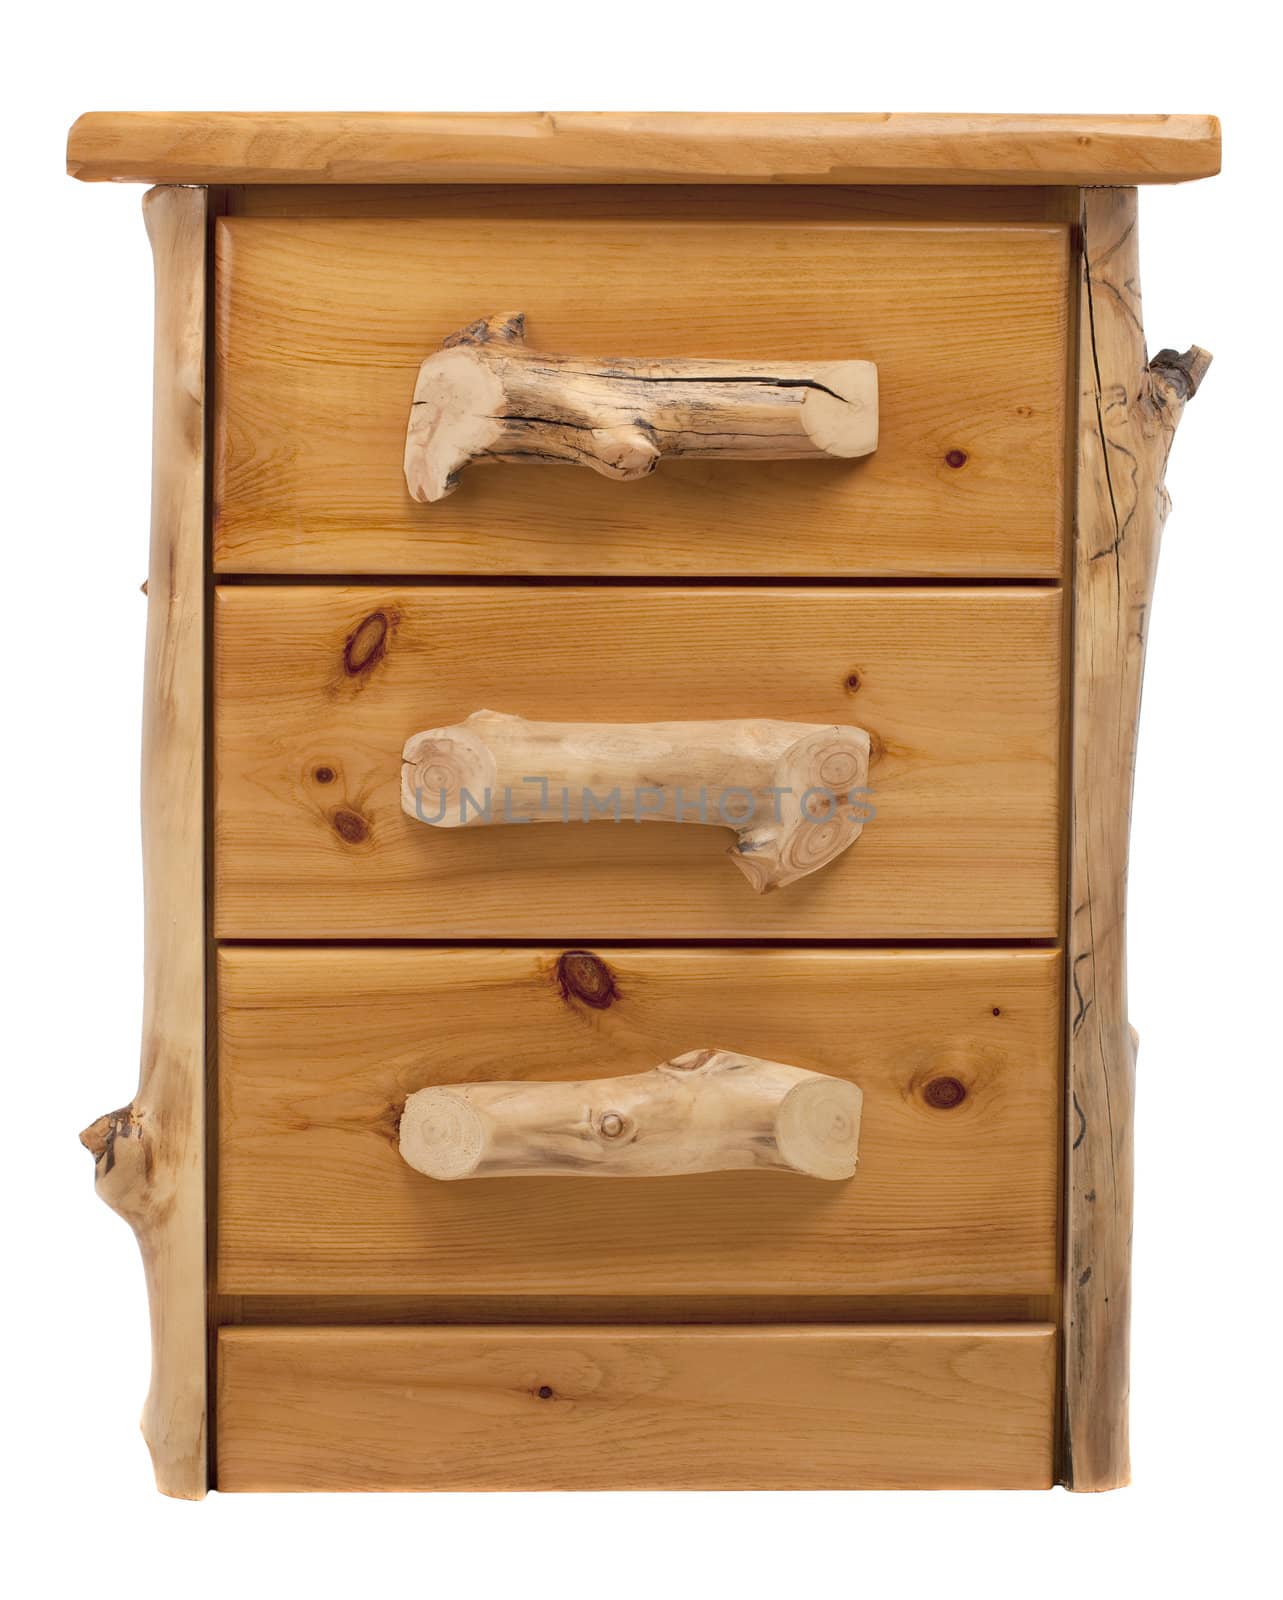 rustic pine chest with drawers by PixelsAway